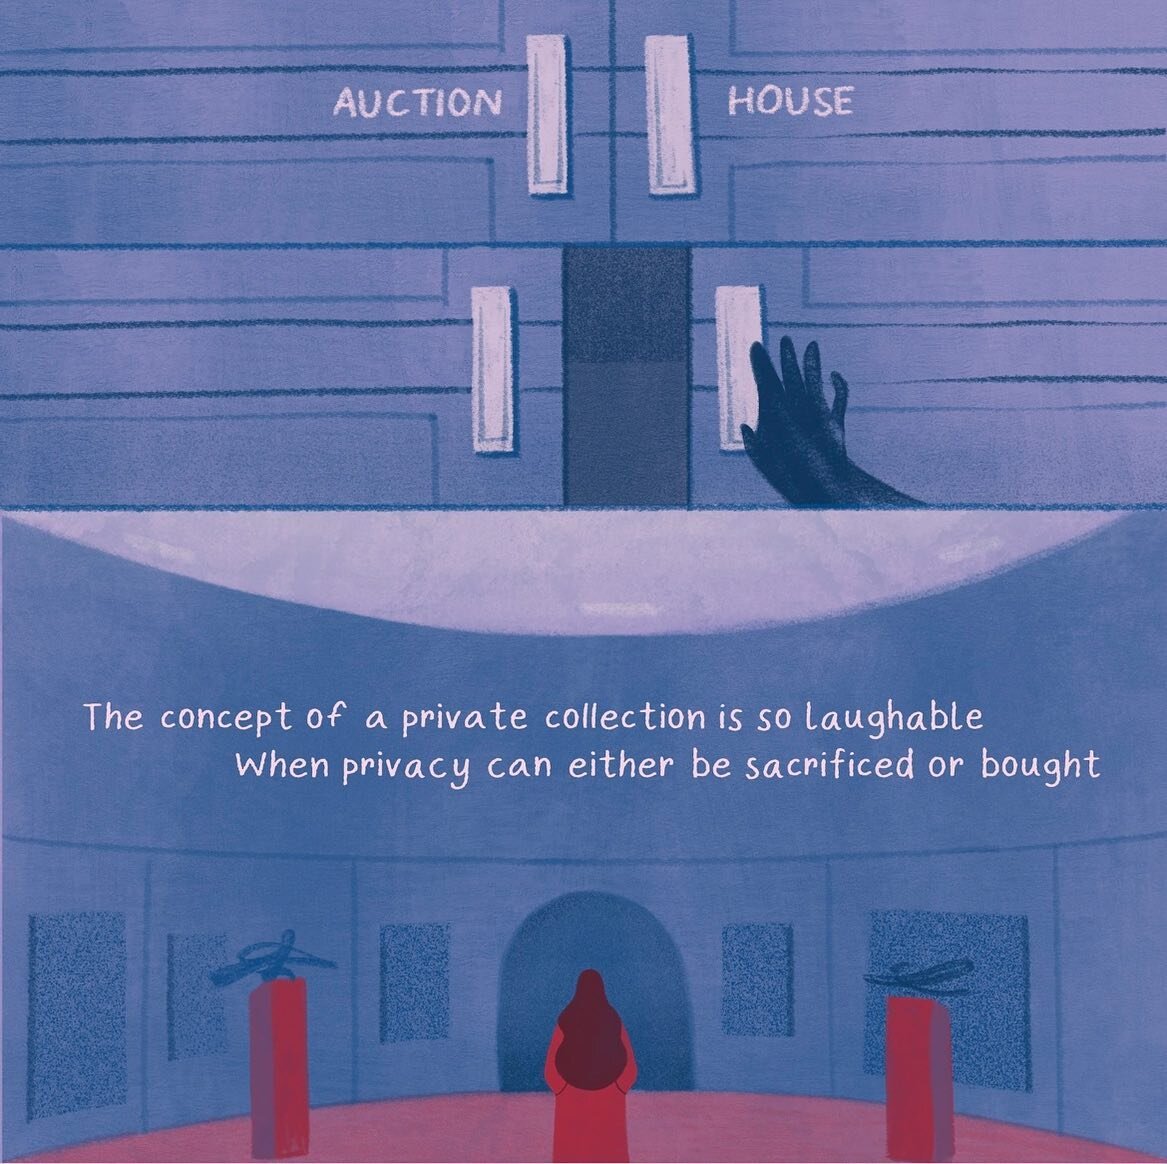 For the end of National Poetry Month, @washingtonpost asked 3 poets and 3 illustrators to collaborate on illustrated poems. I am so gobsmacked that my new poem, &ldquo;Auction House,&rdquo; was interpreted and illustrated by the brilliantly talented 